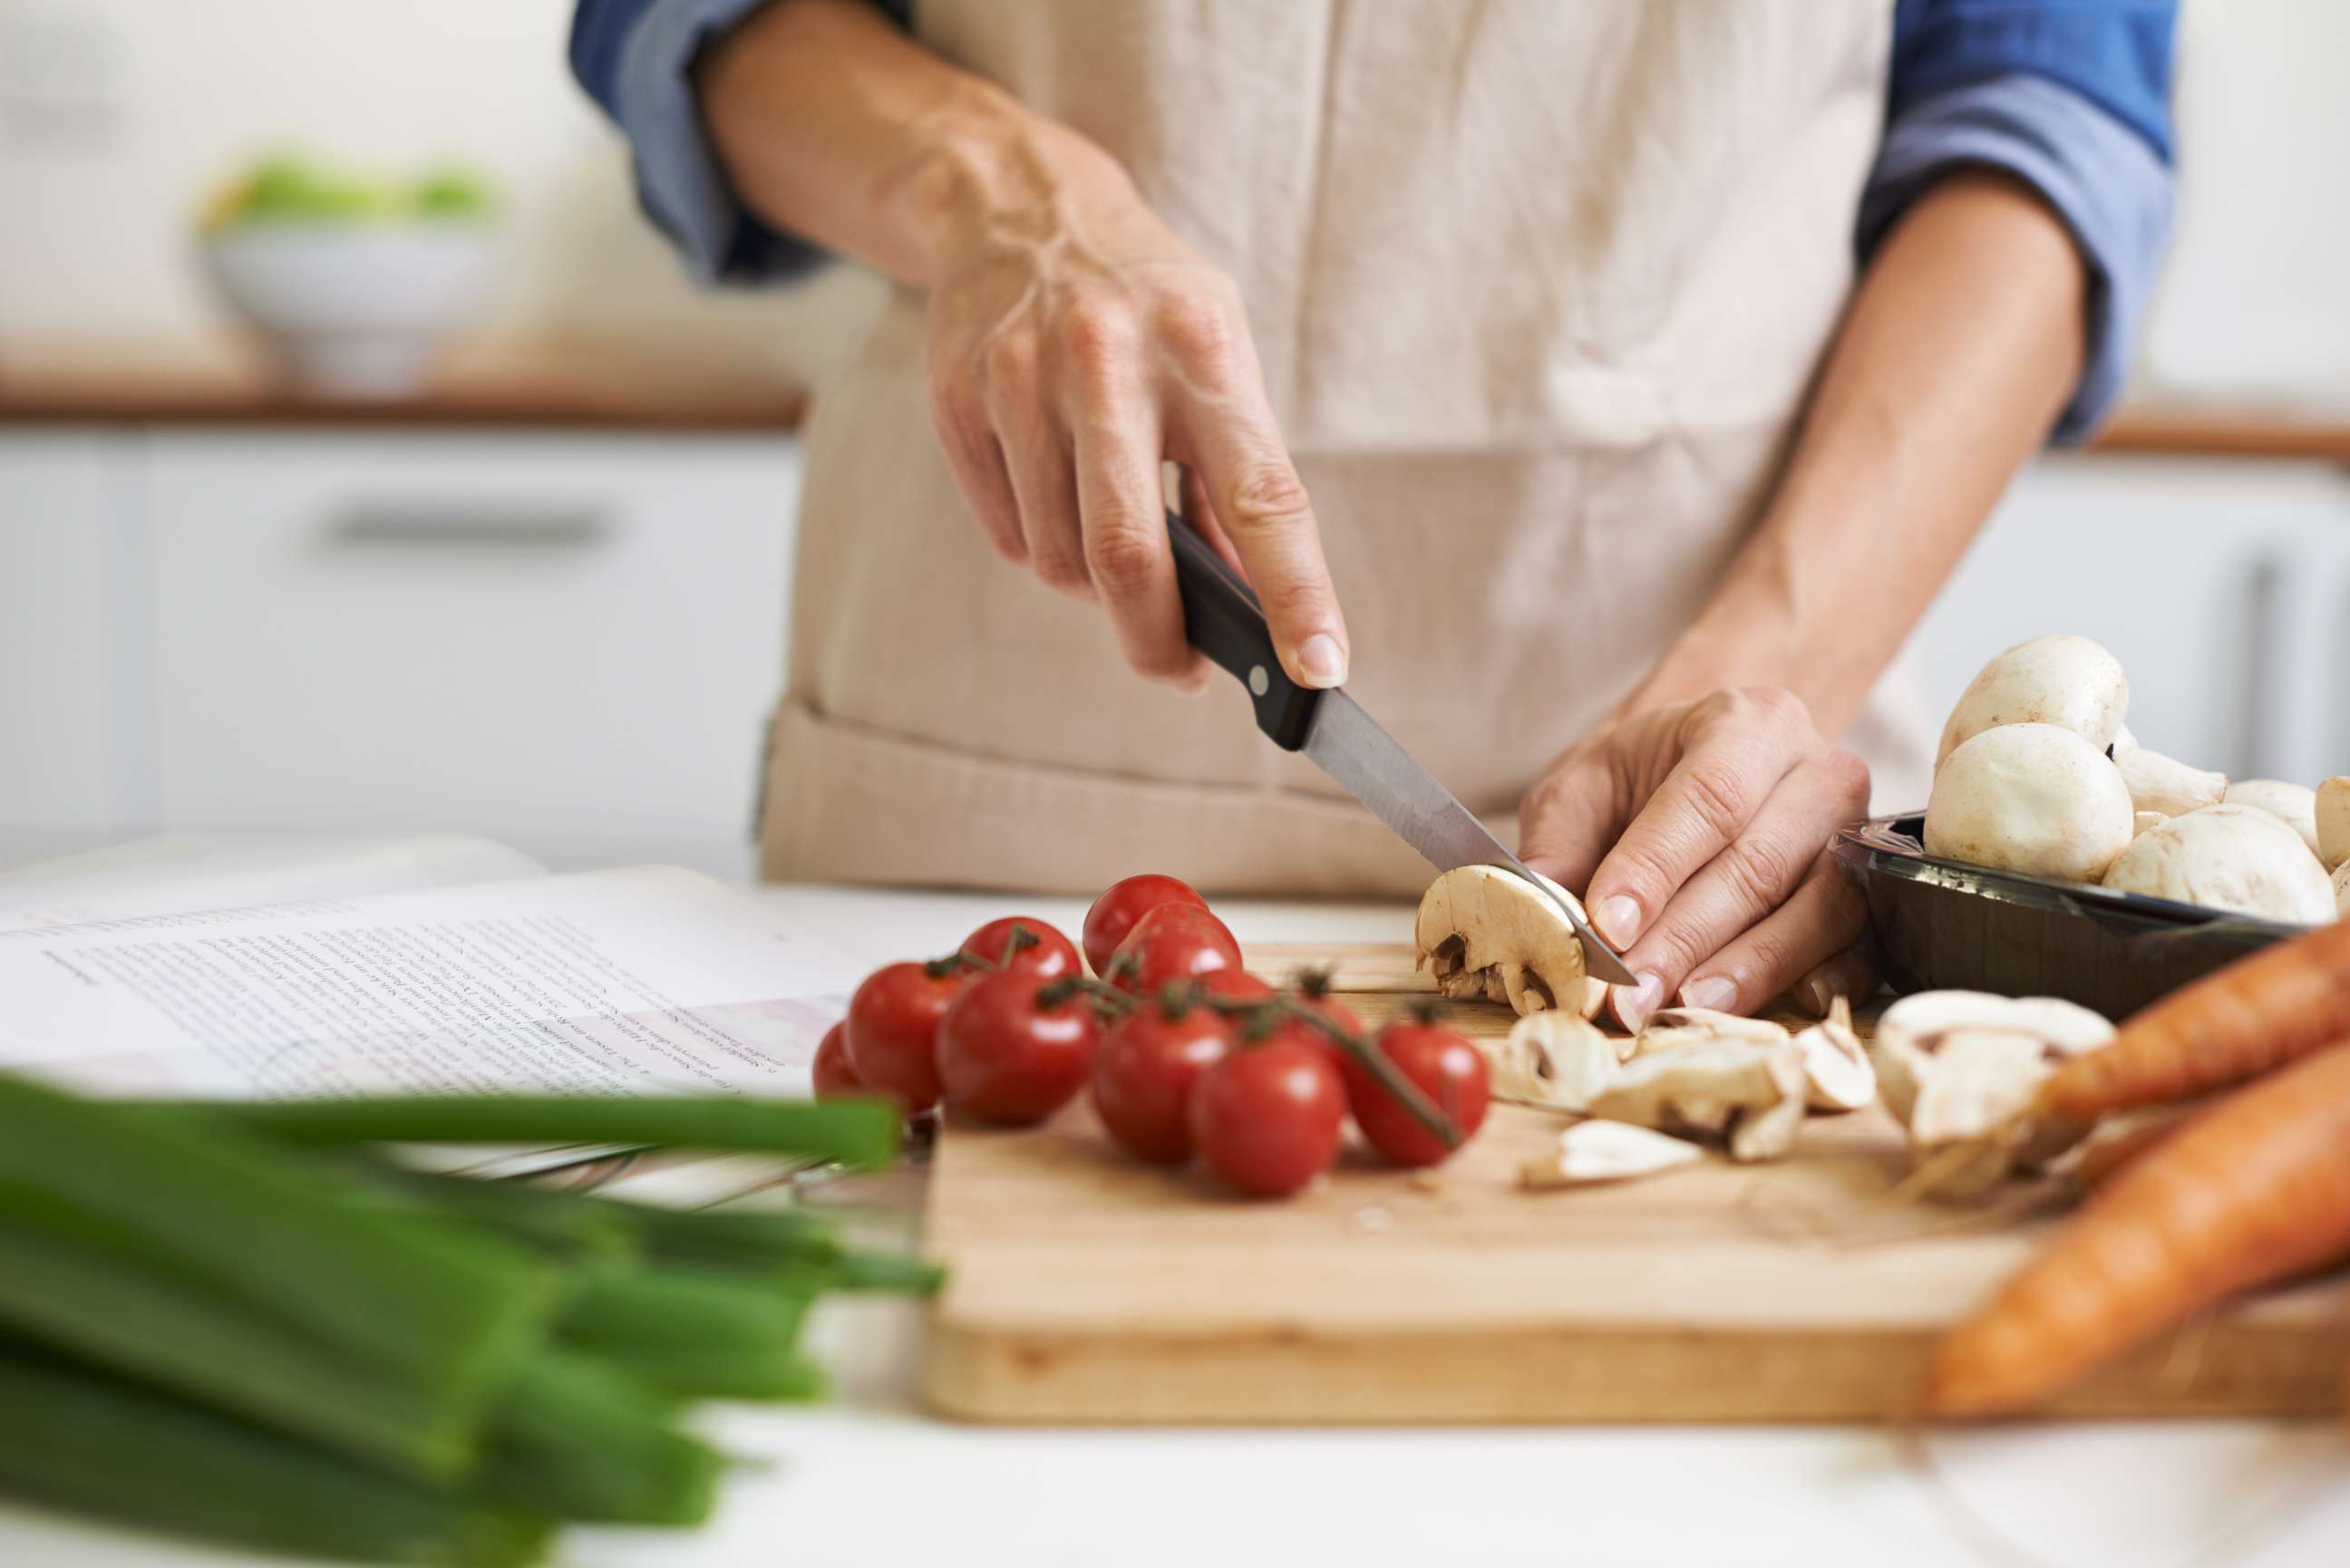 Can chopping your vegetables boost their nutrients? - Healthy Food